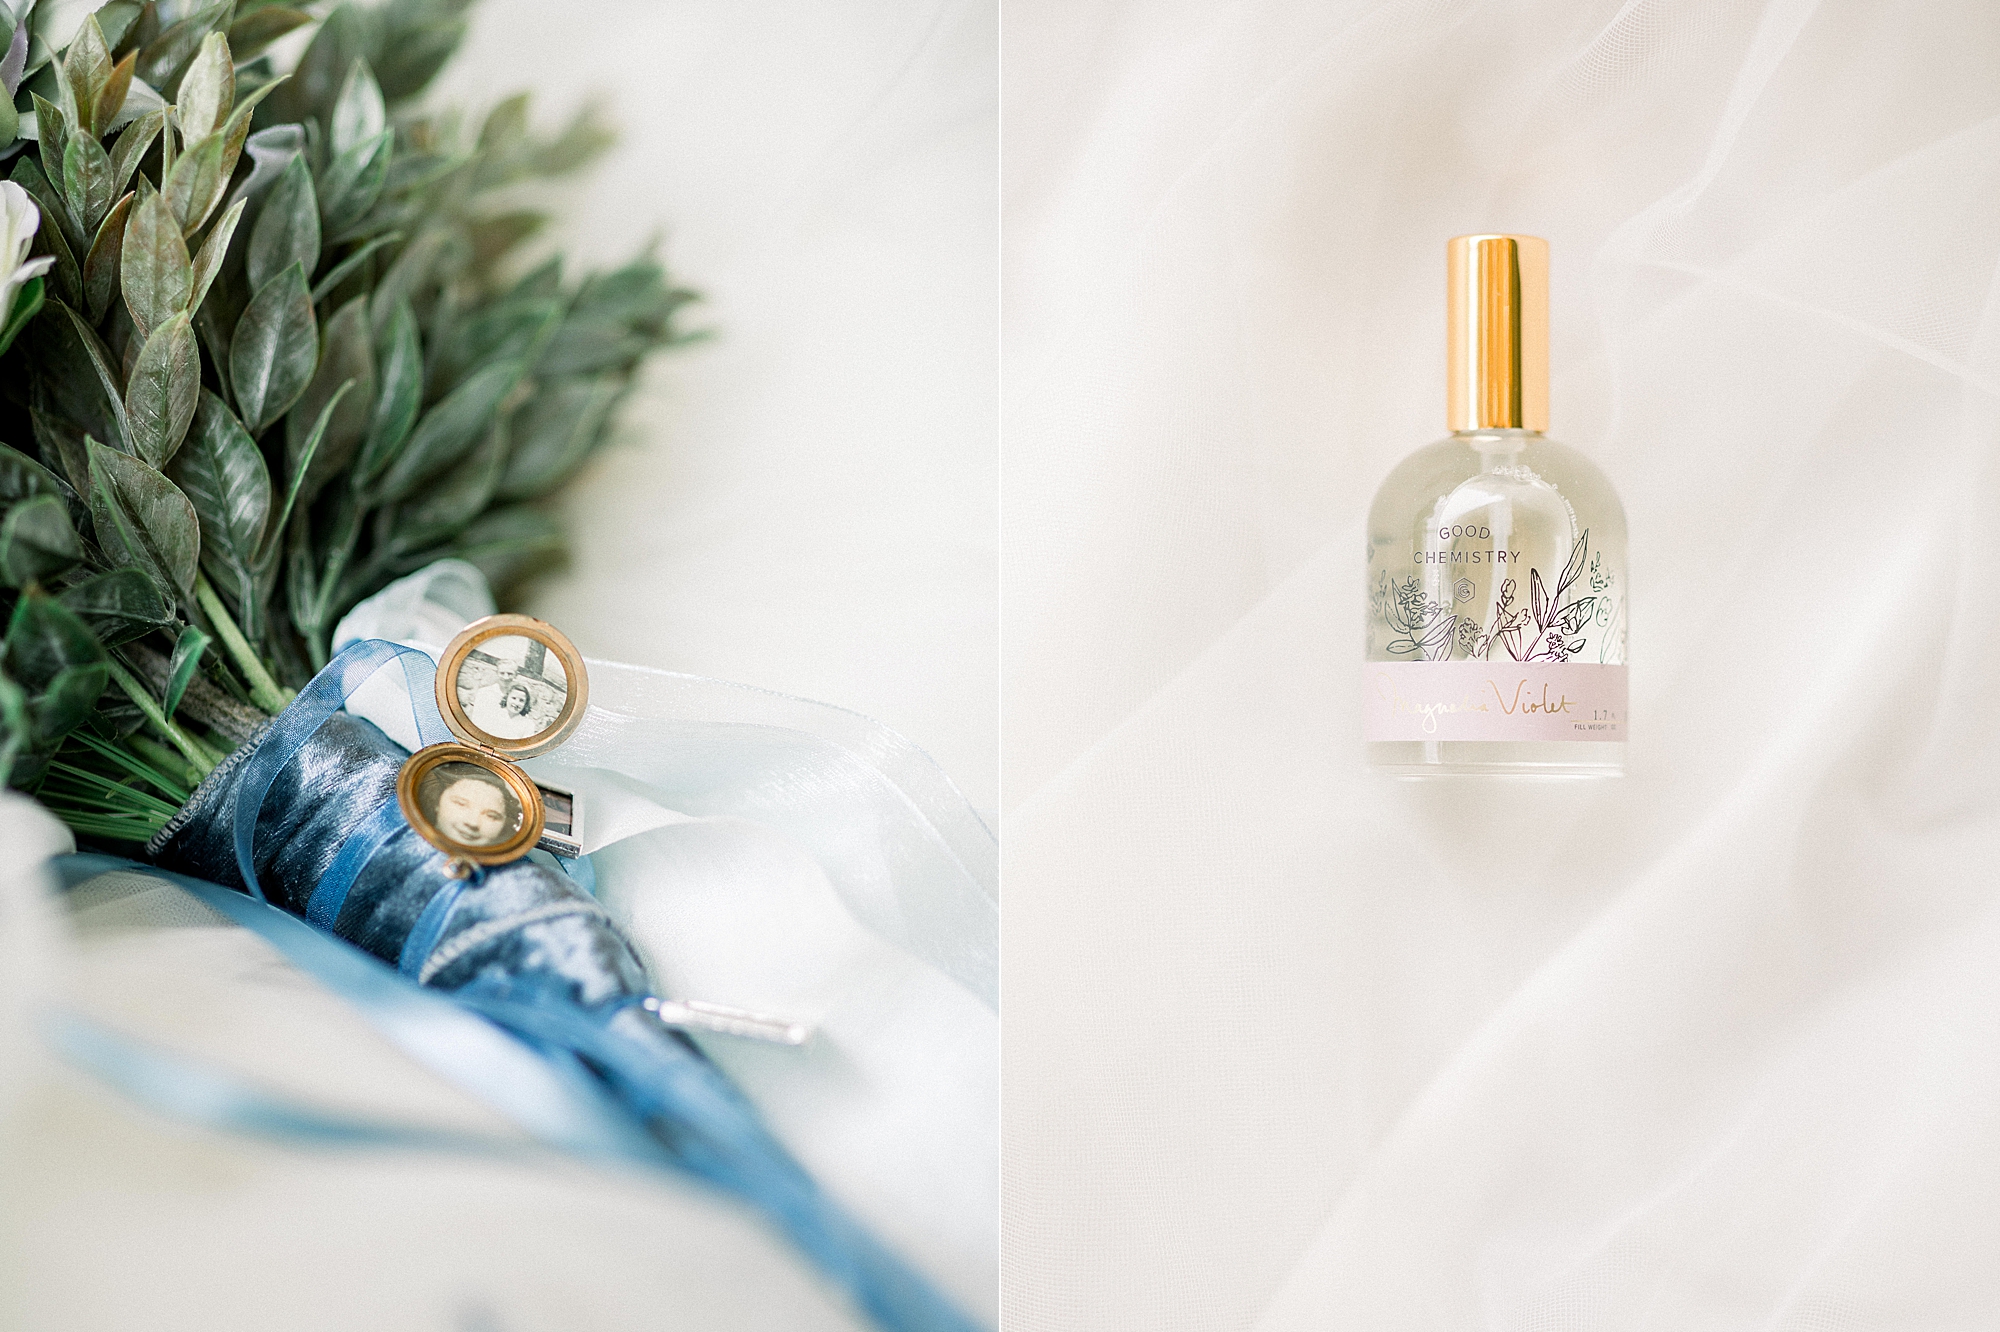 a photo of a silk flower bouquet with hints of blue and lockets of lost loved ones next to a photo of a perfume bottle for James and Kayla's wedding day photographed by j. photography 